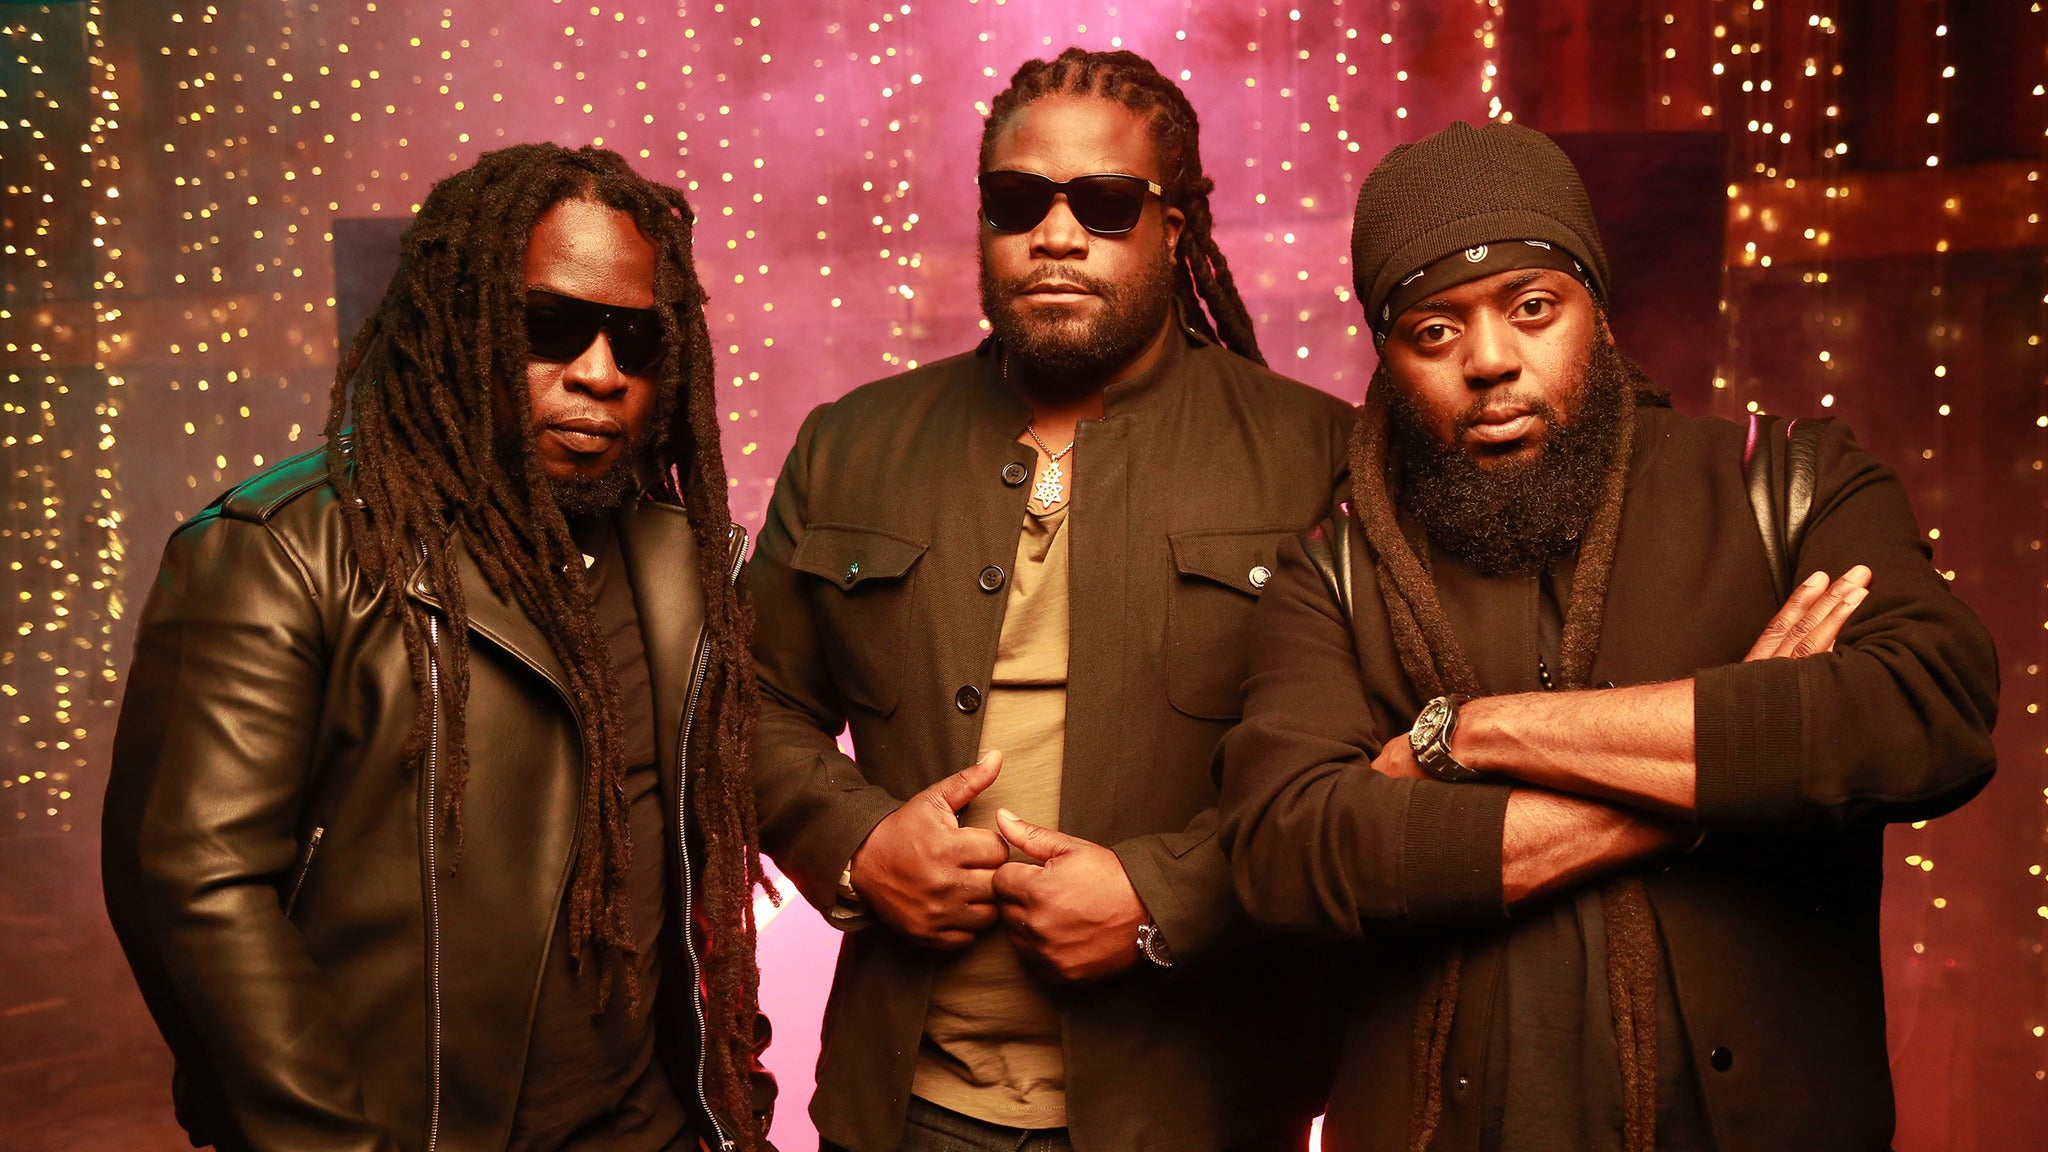 Morgan Heritage in Austin promo photo for Day Of Show presale offer code